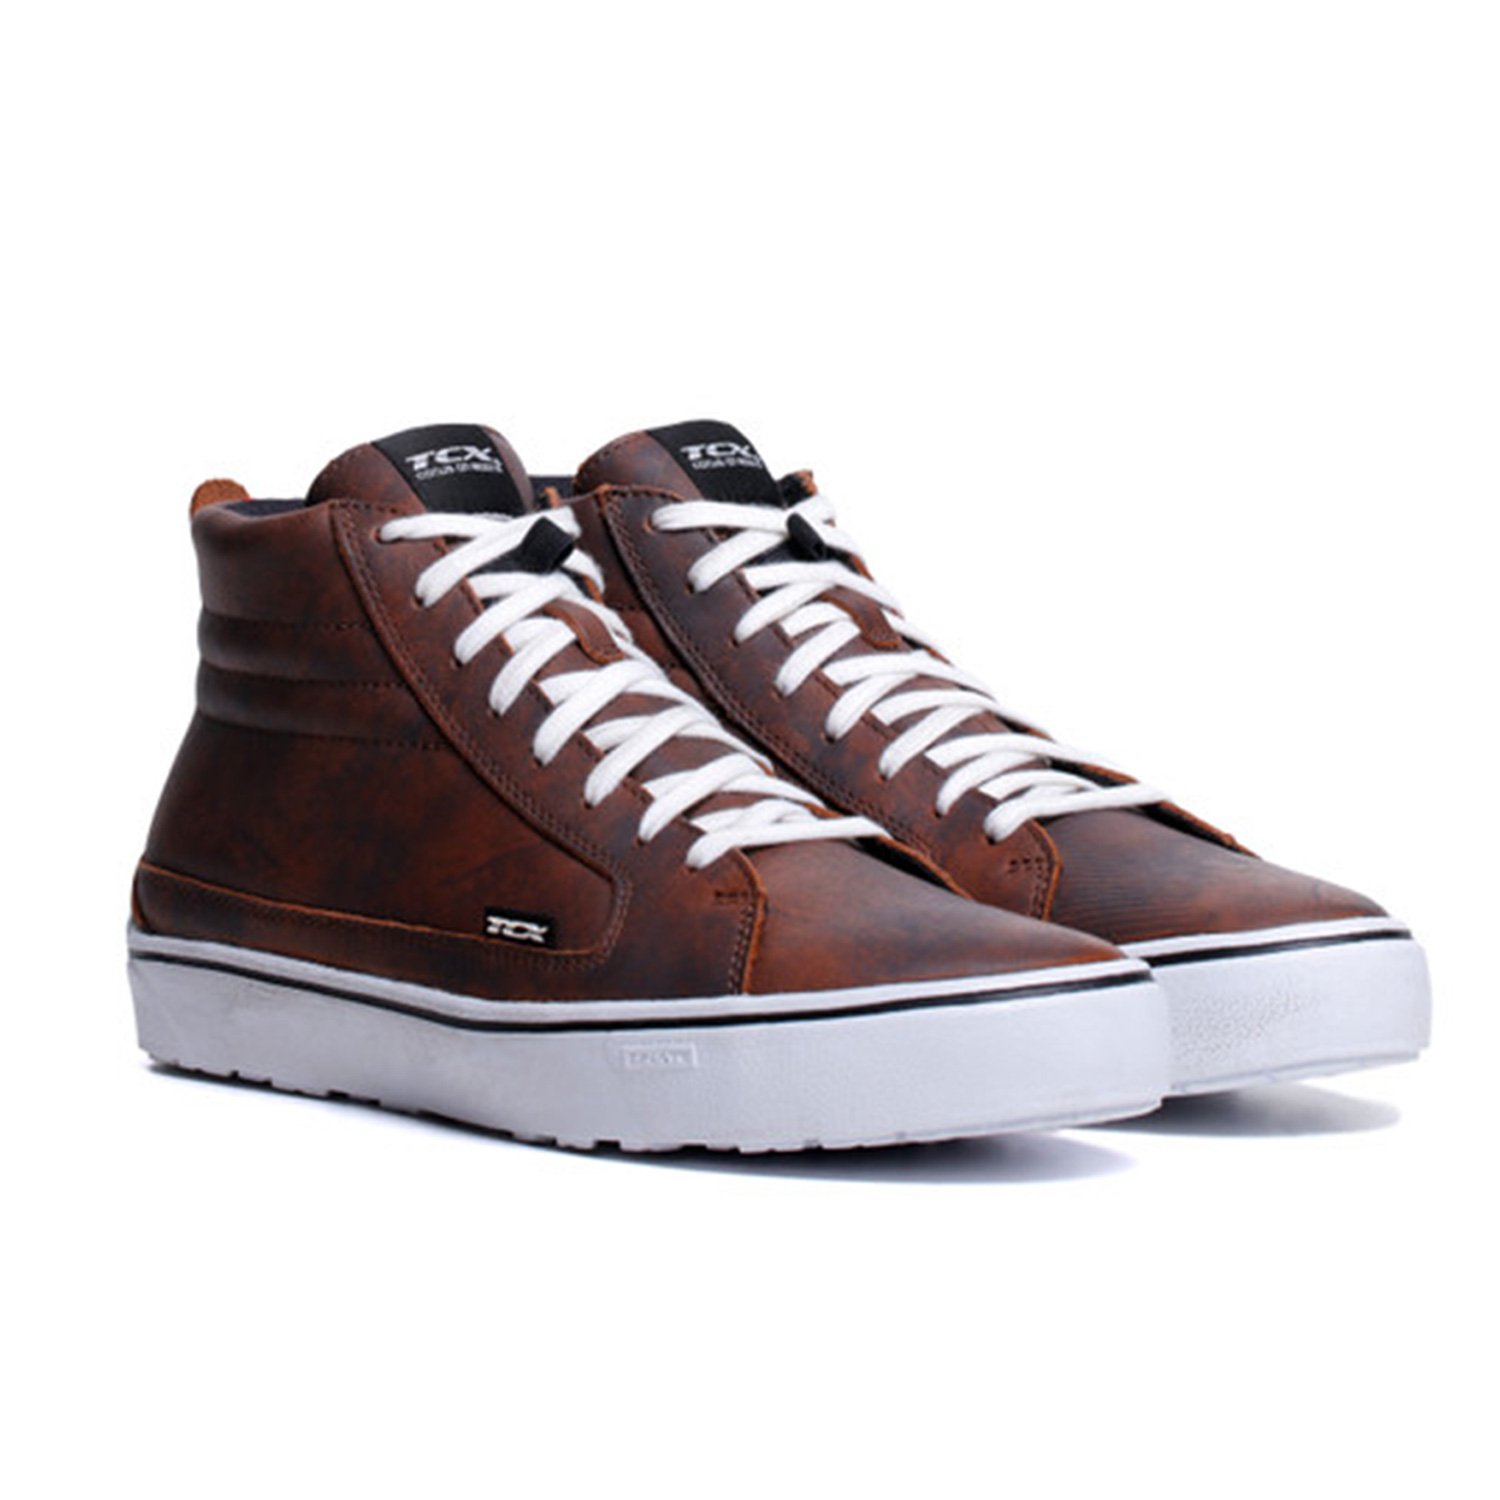 Image of TCX Street 3 WP Marron Blanc Chaussures Taille 44